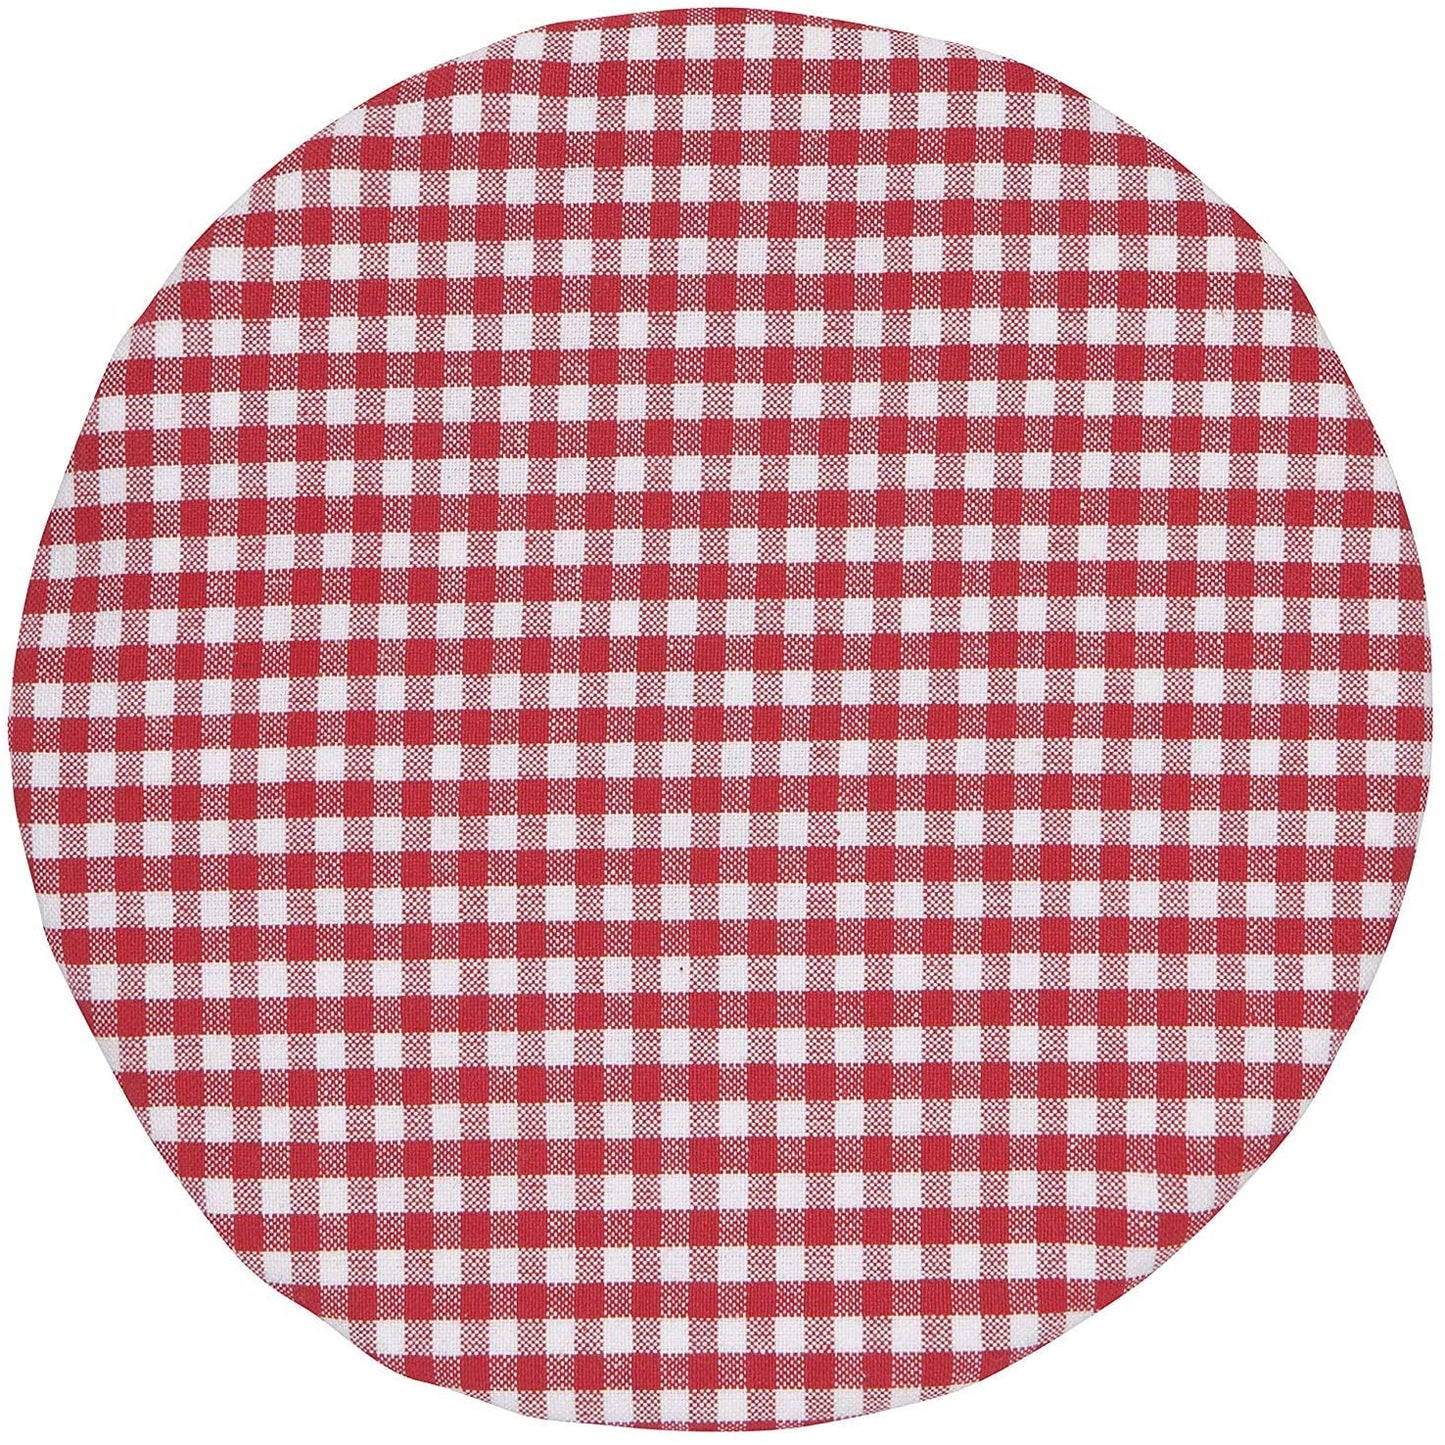 top view of the gingham bowl cover against a white background